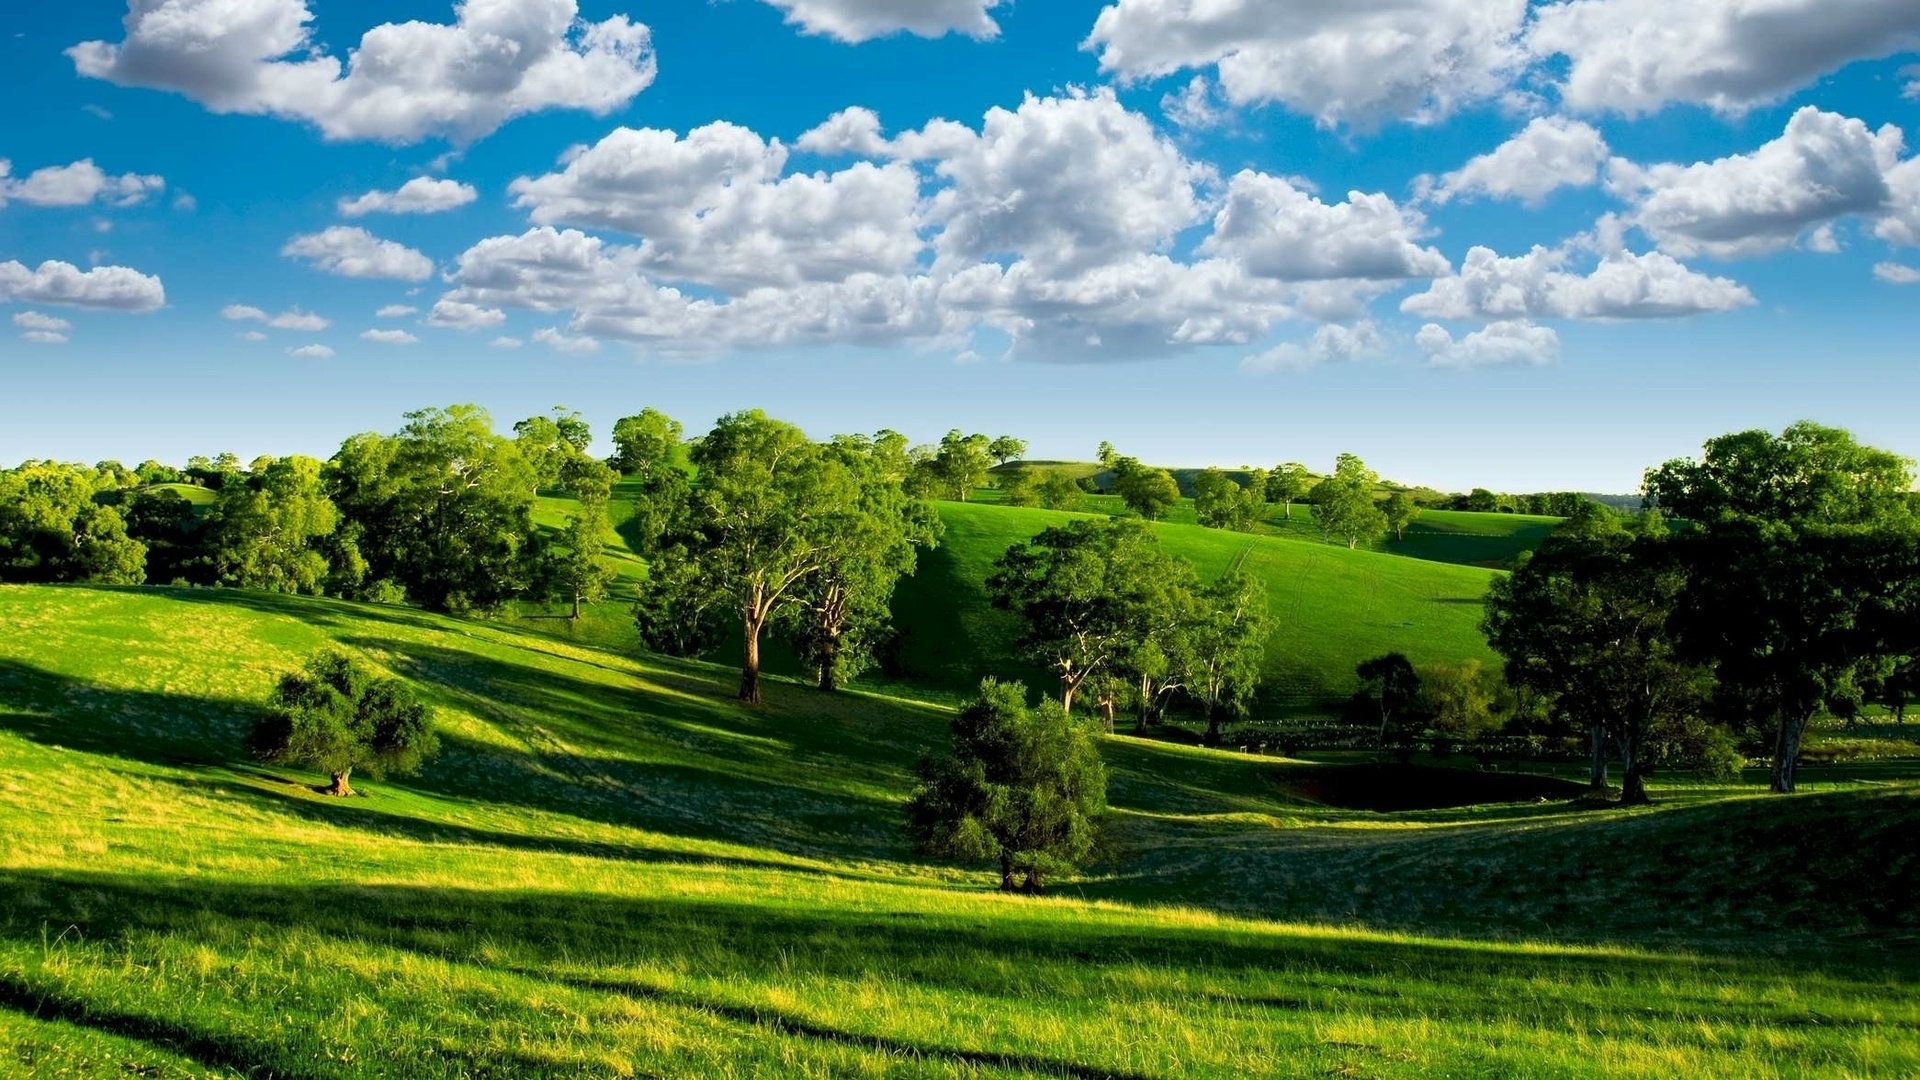 beautiful scenery wallpapers,natural landscape,nature,green,sky,grassland